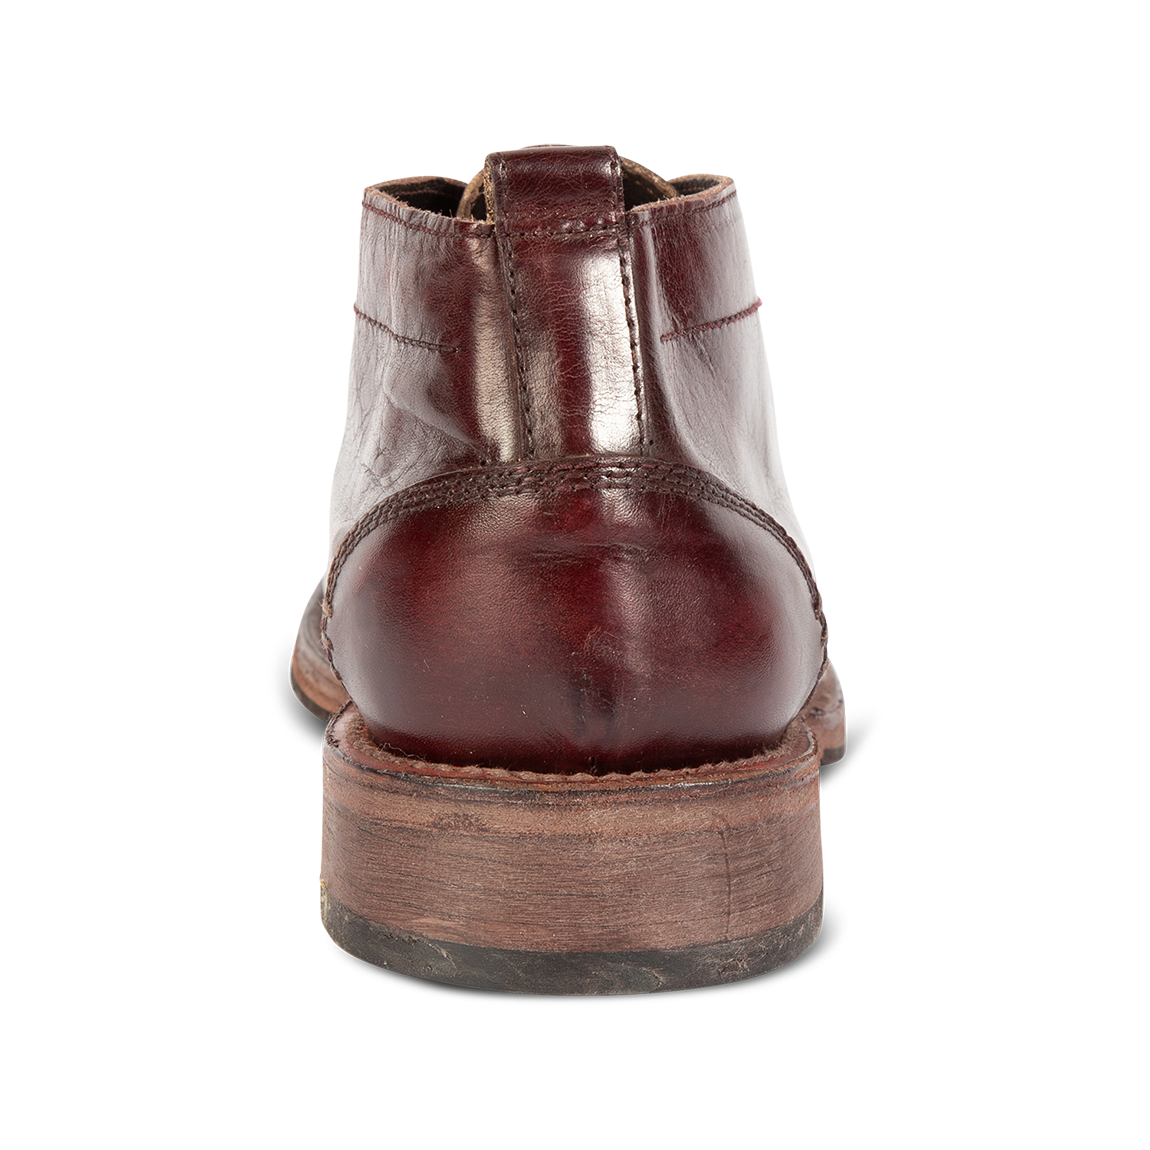 Back view showing leather pull tab and contrasting heel on FREEBIRD men's McCoy wine shoe